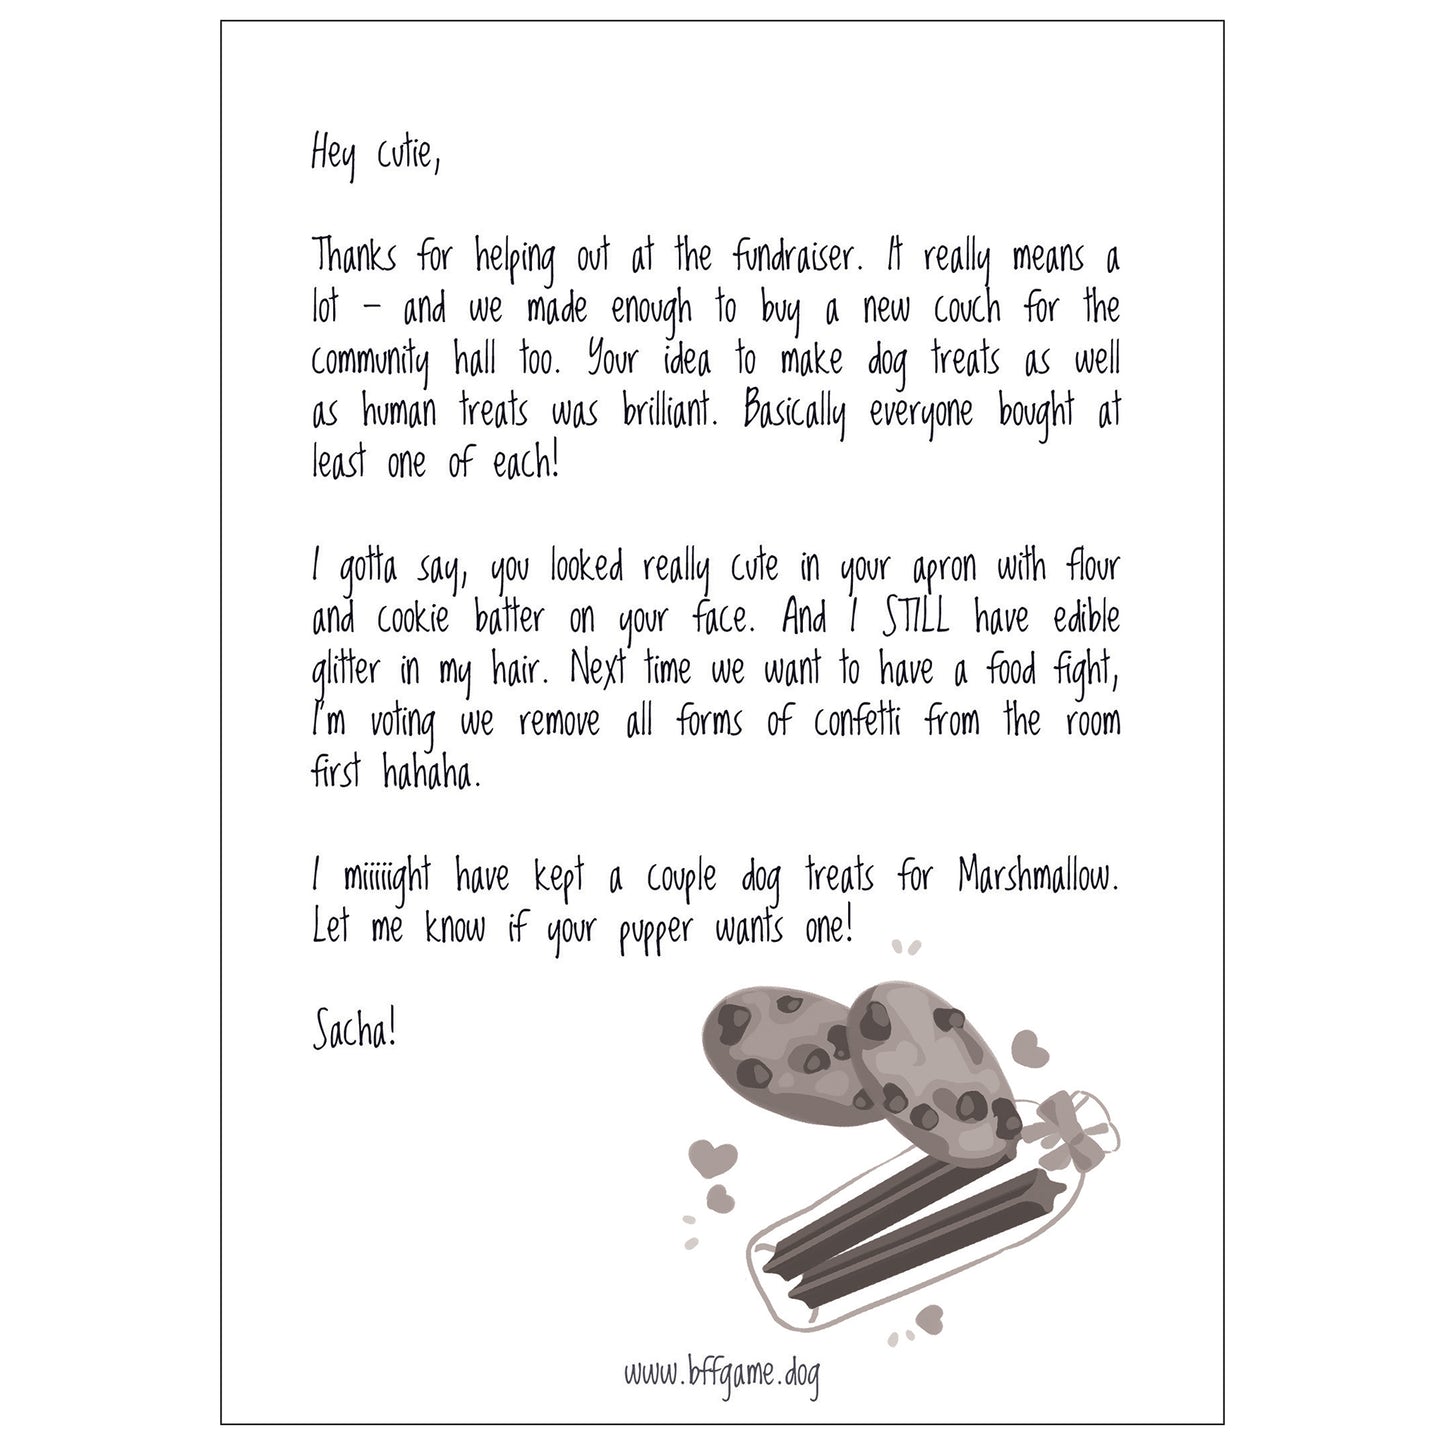 Mockup of a letter signed "Sacha!" with a drawing of two chocolate chip cookies and dog treats surrounded by hearts in black and white. White background.